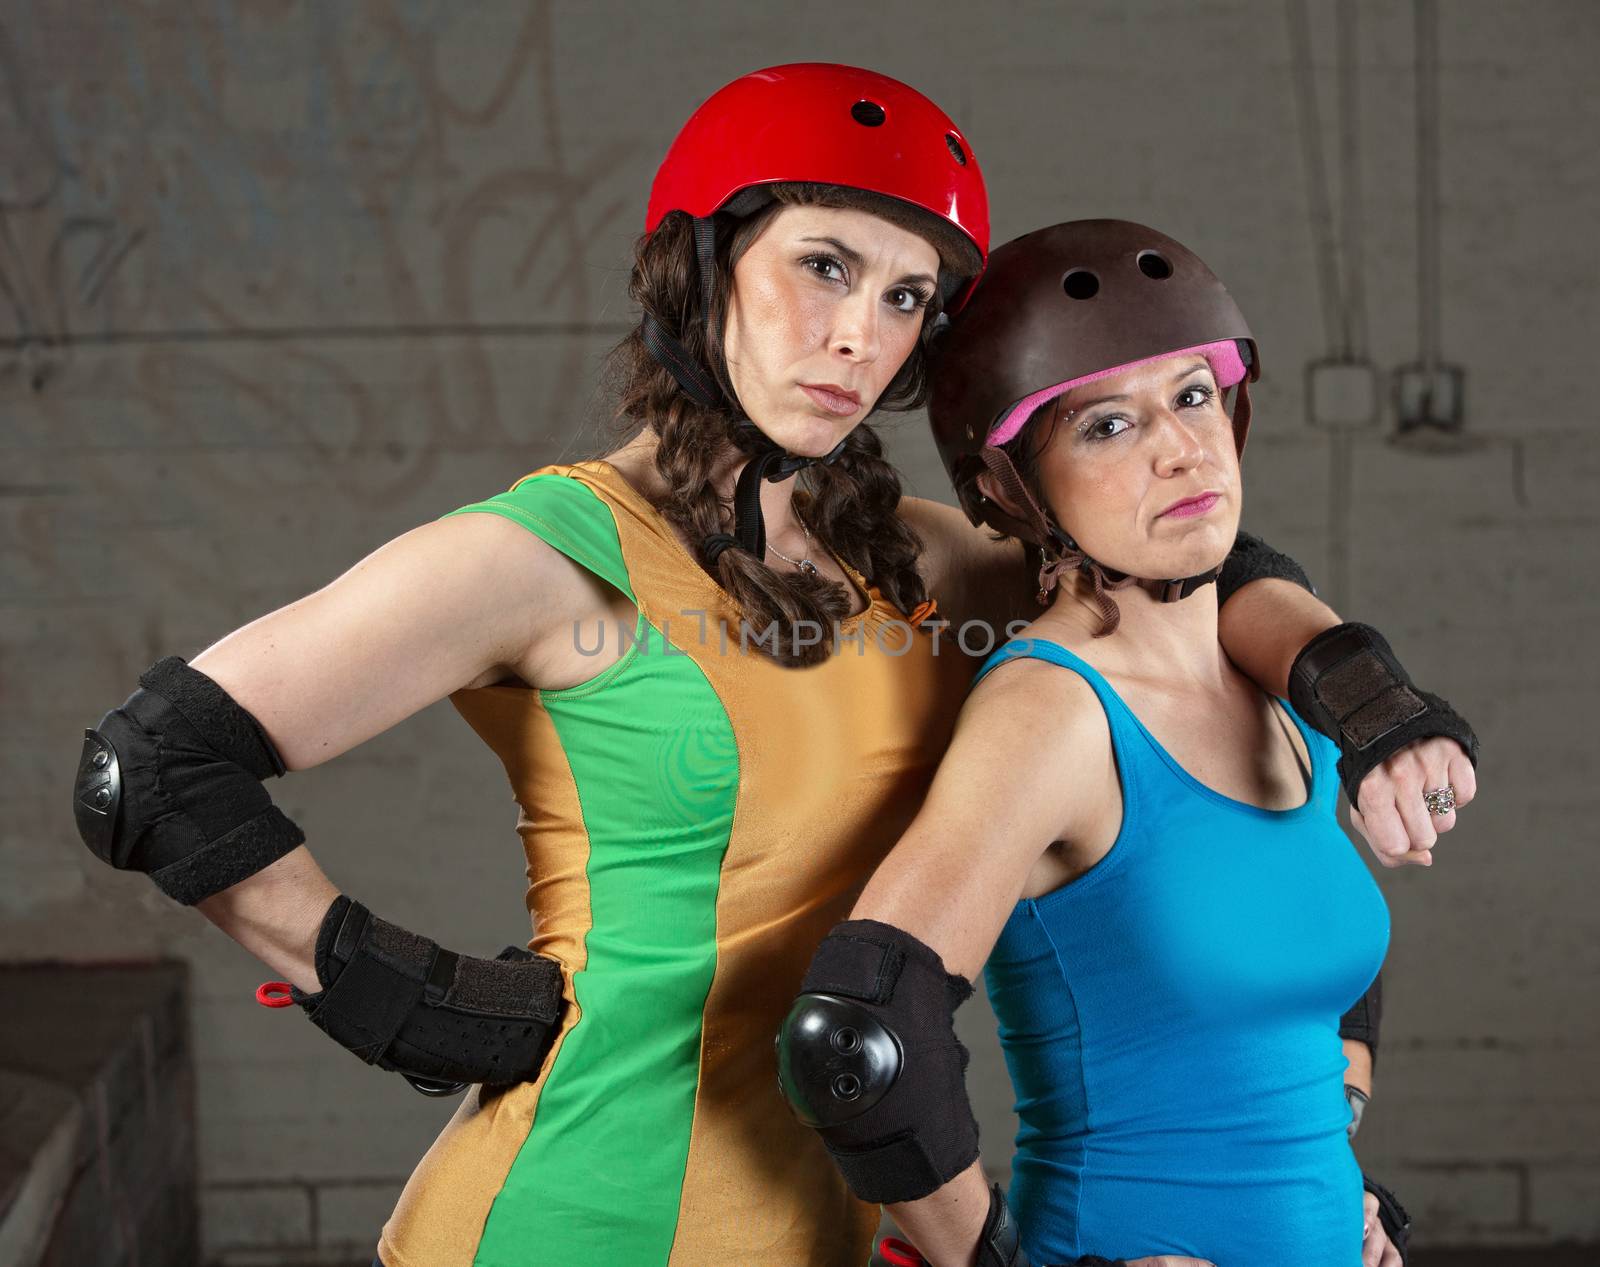 Confident Roller Derby Skating Partners by Creatista